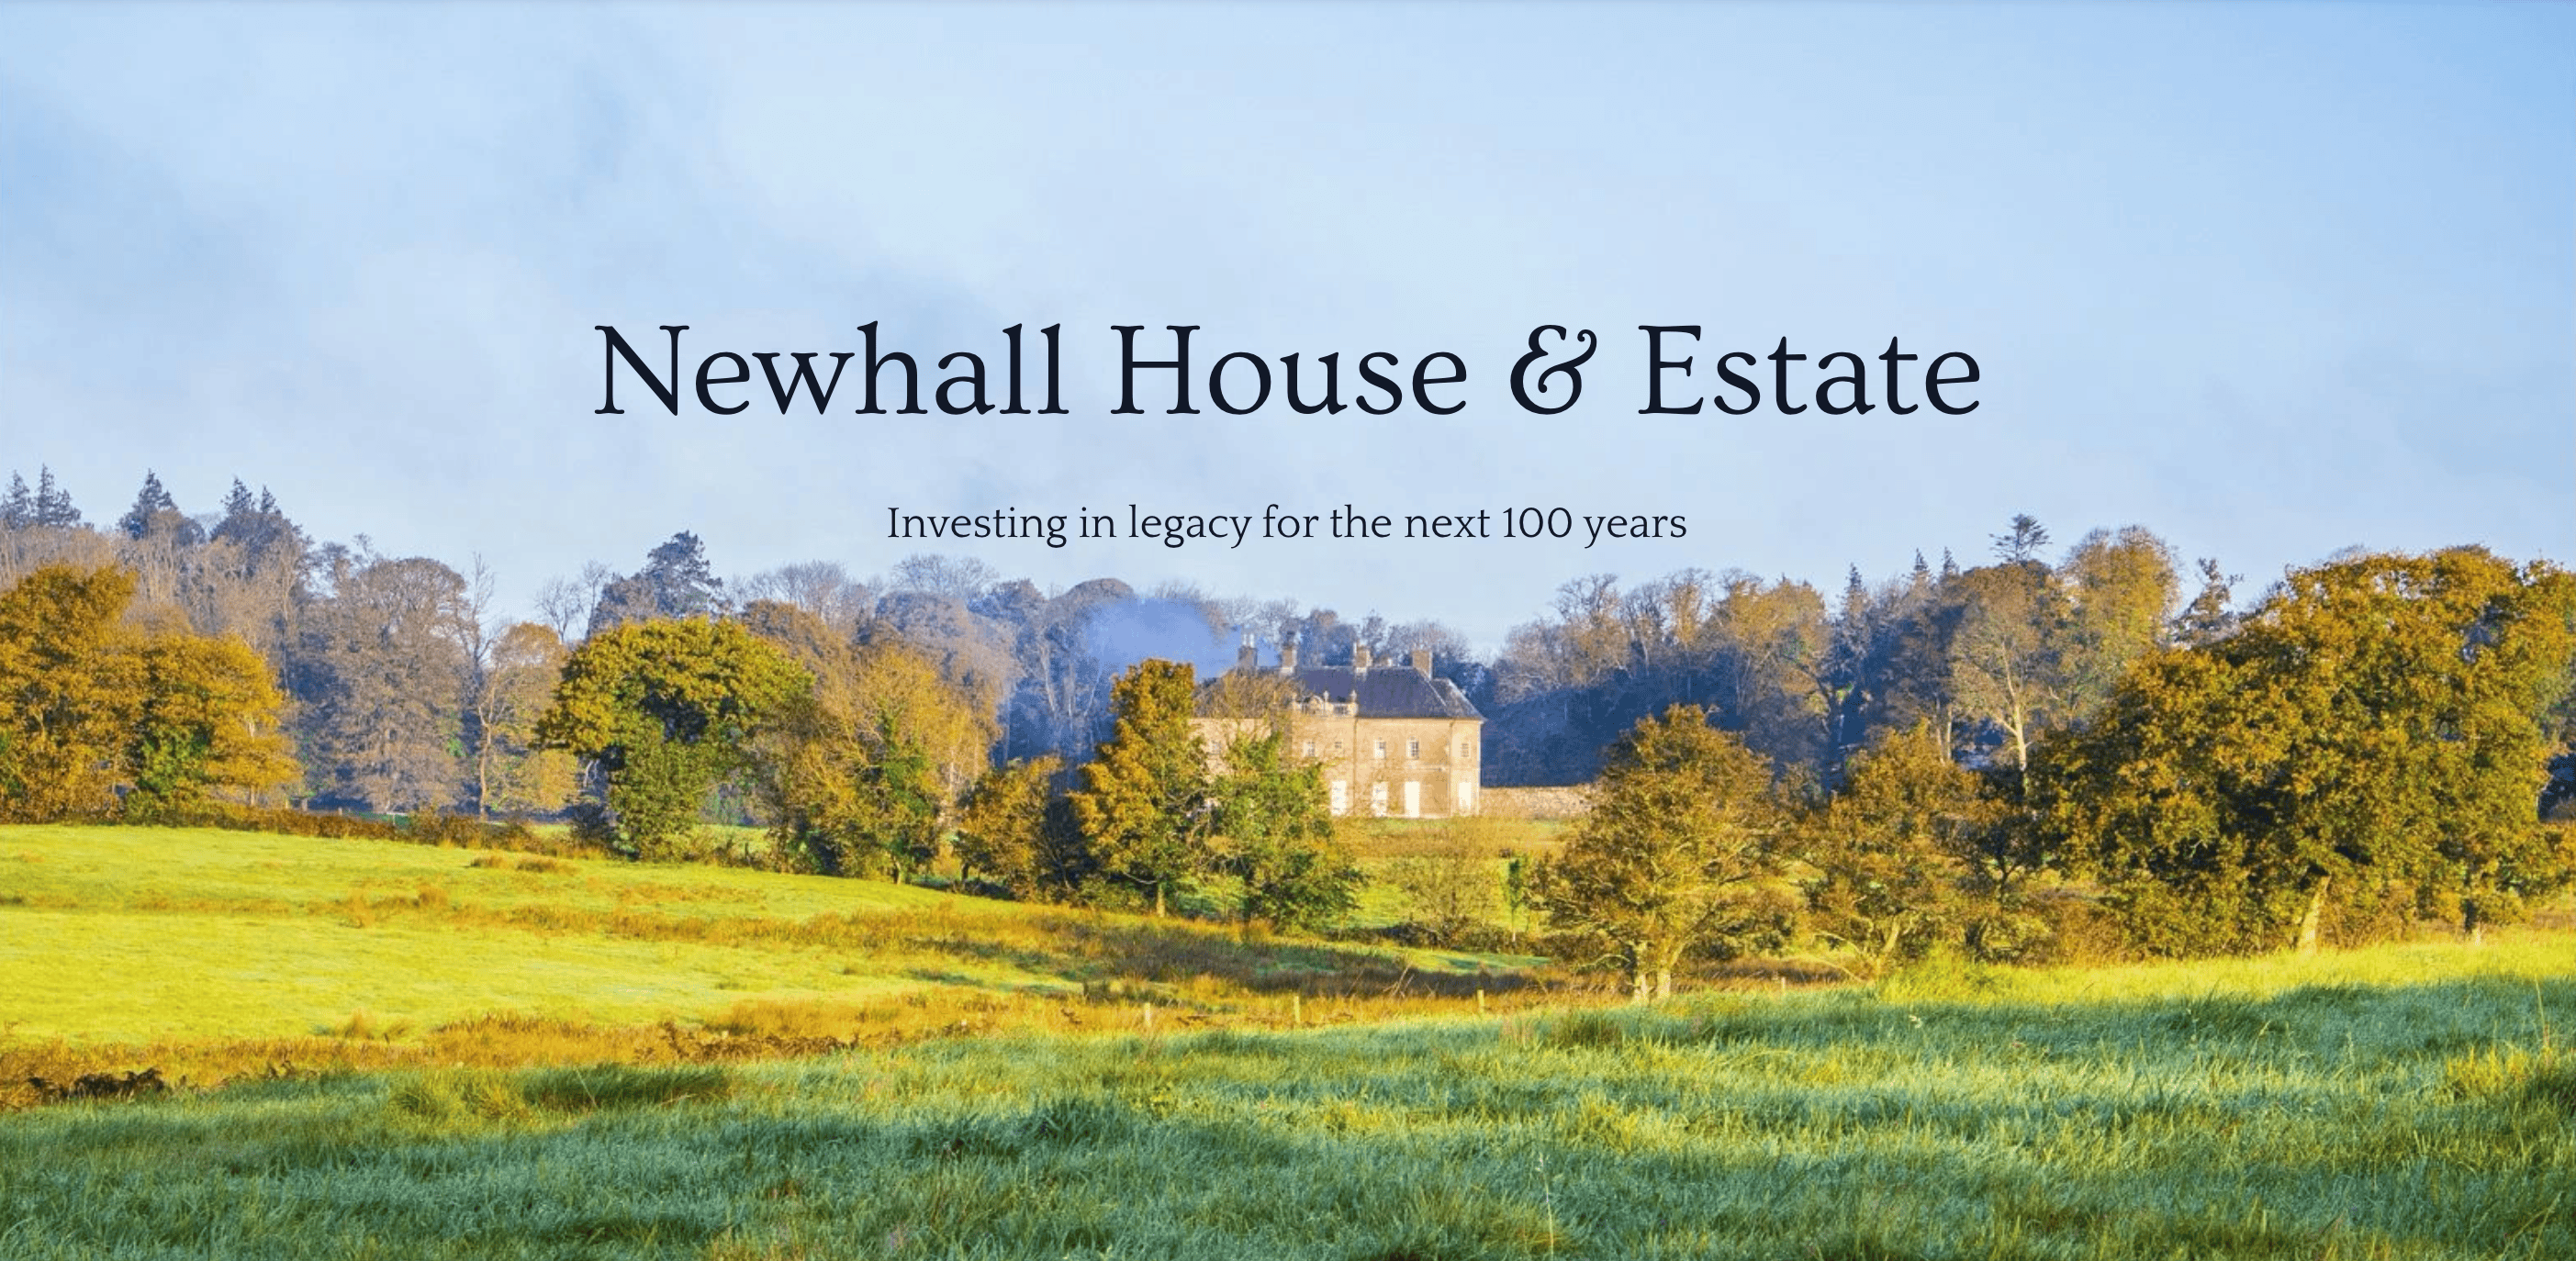 Newhall House